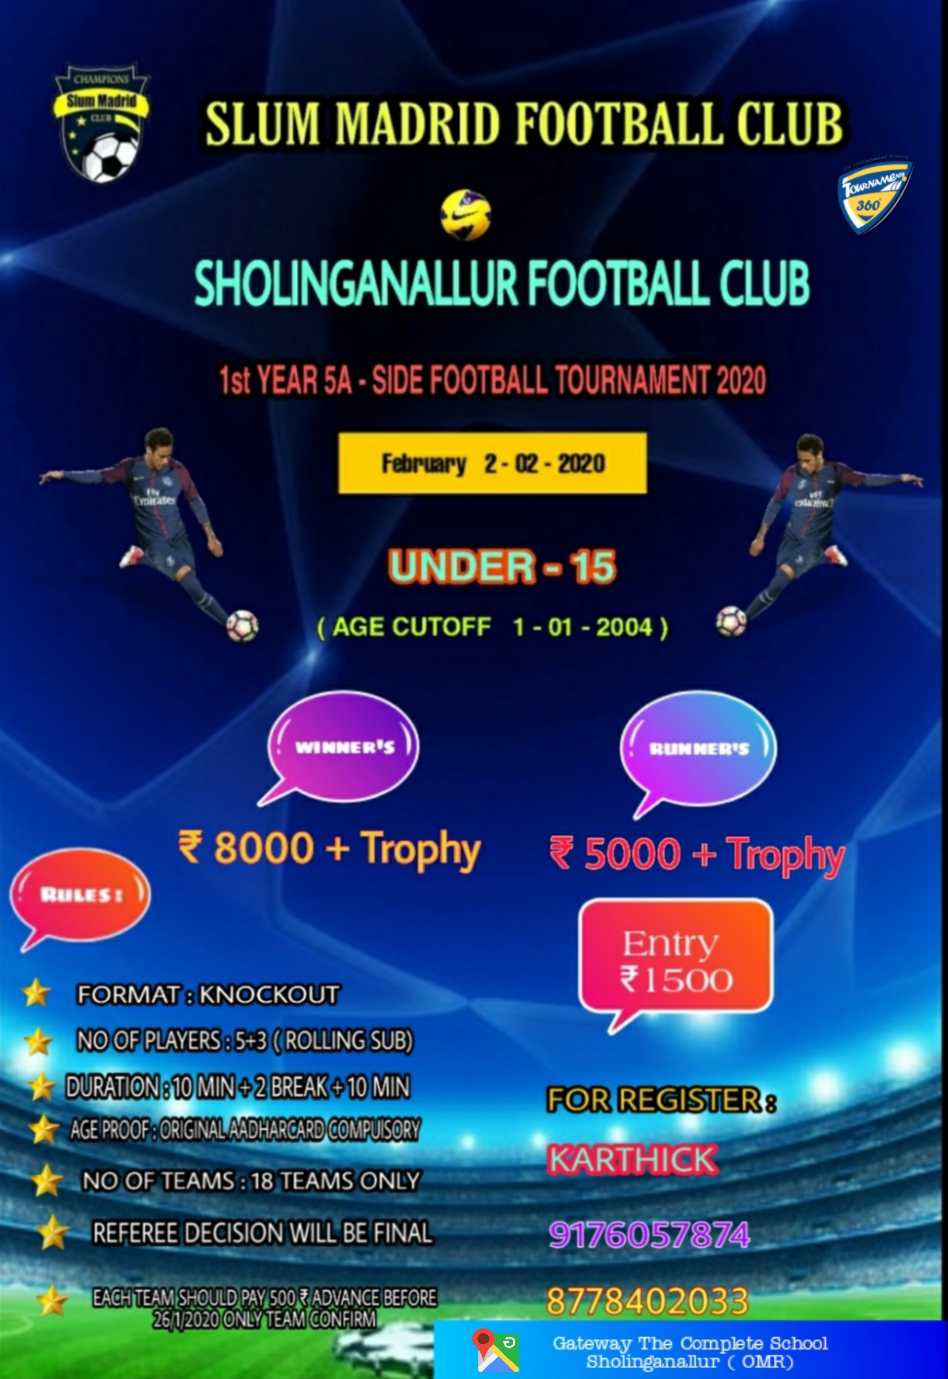 1st Year 5A Side Football Tournament 2020